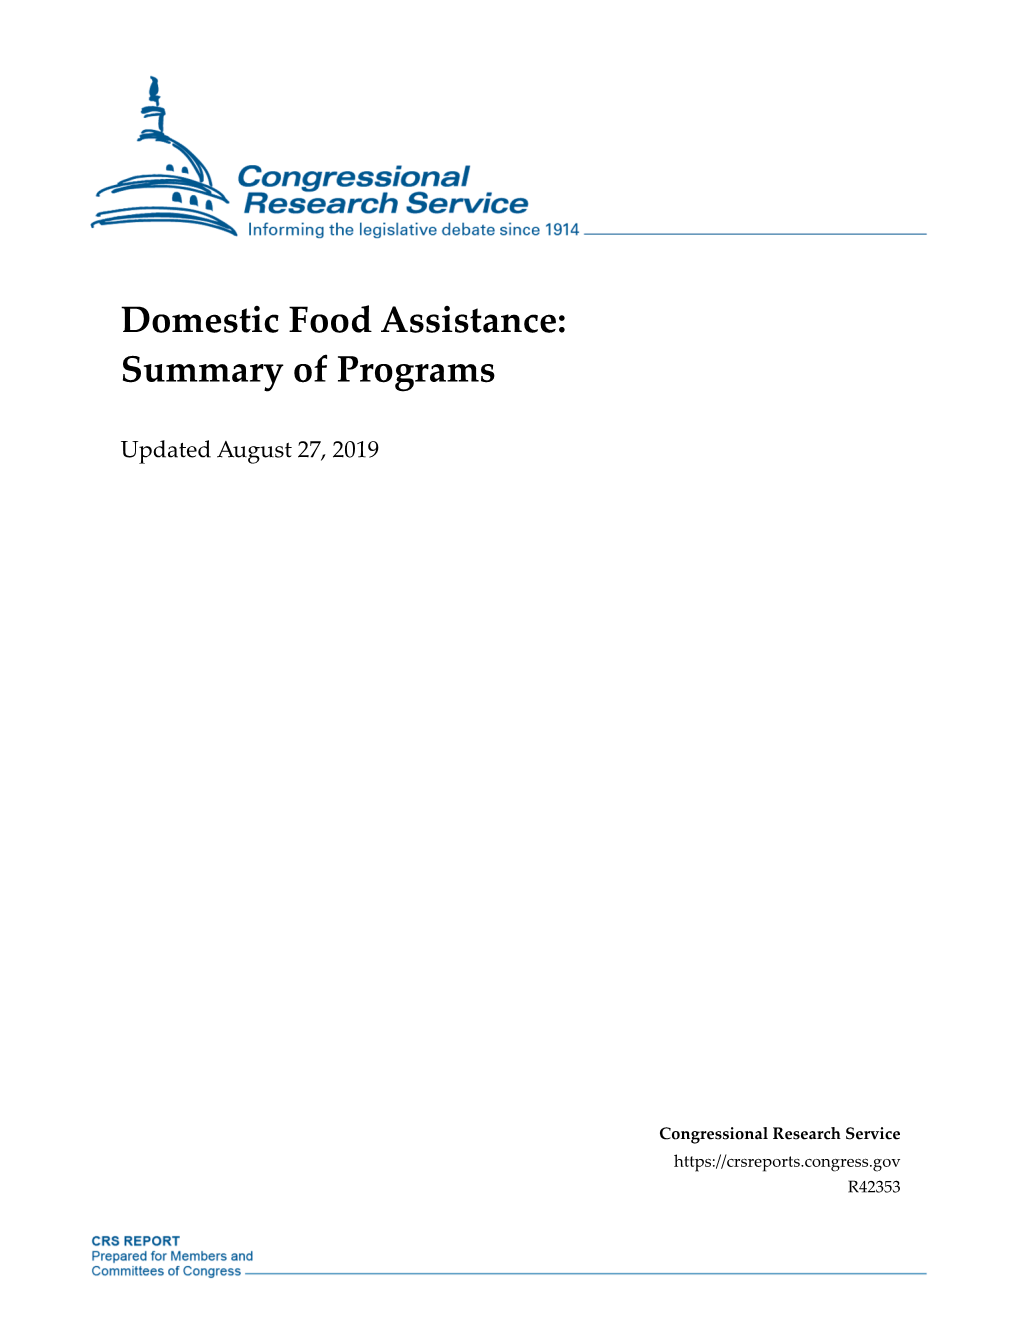 Domestic Food Assistance: Summary of Programs